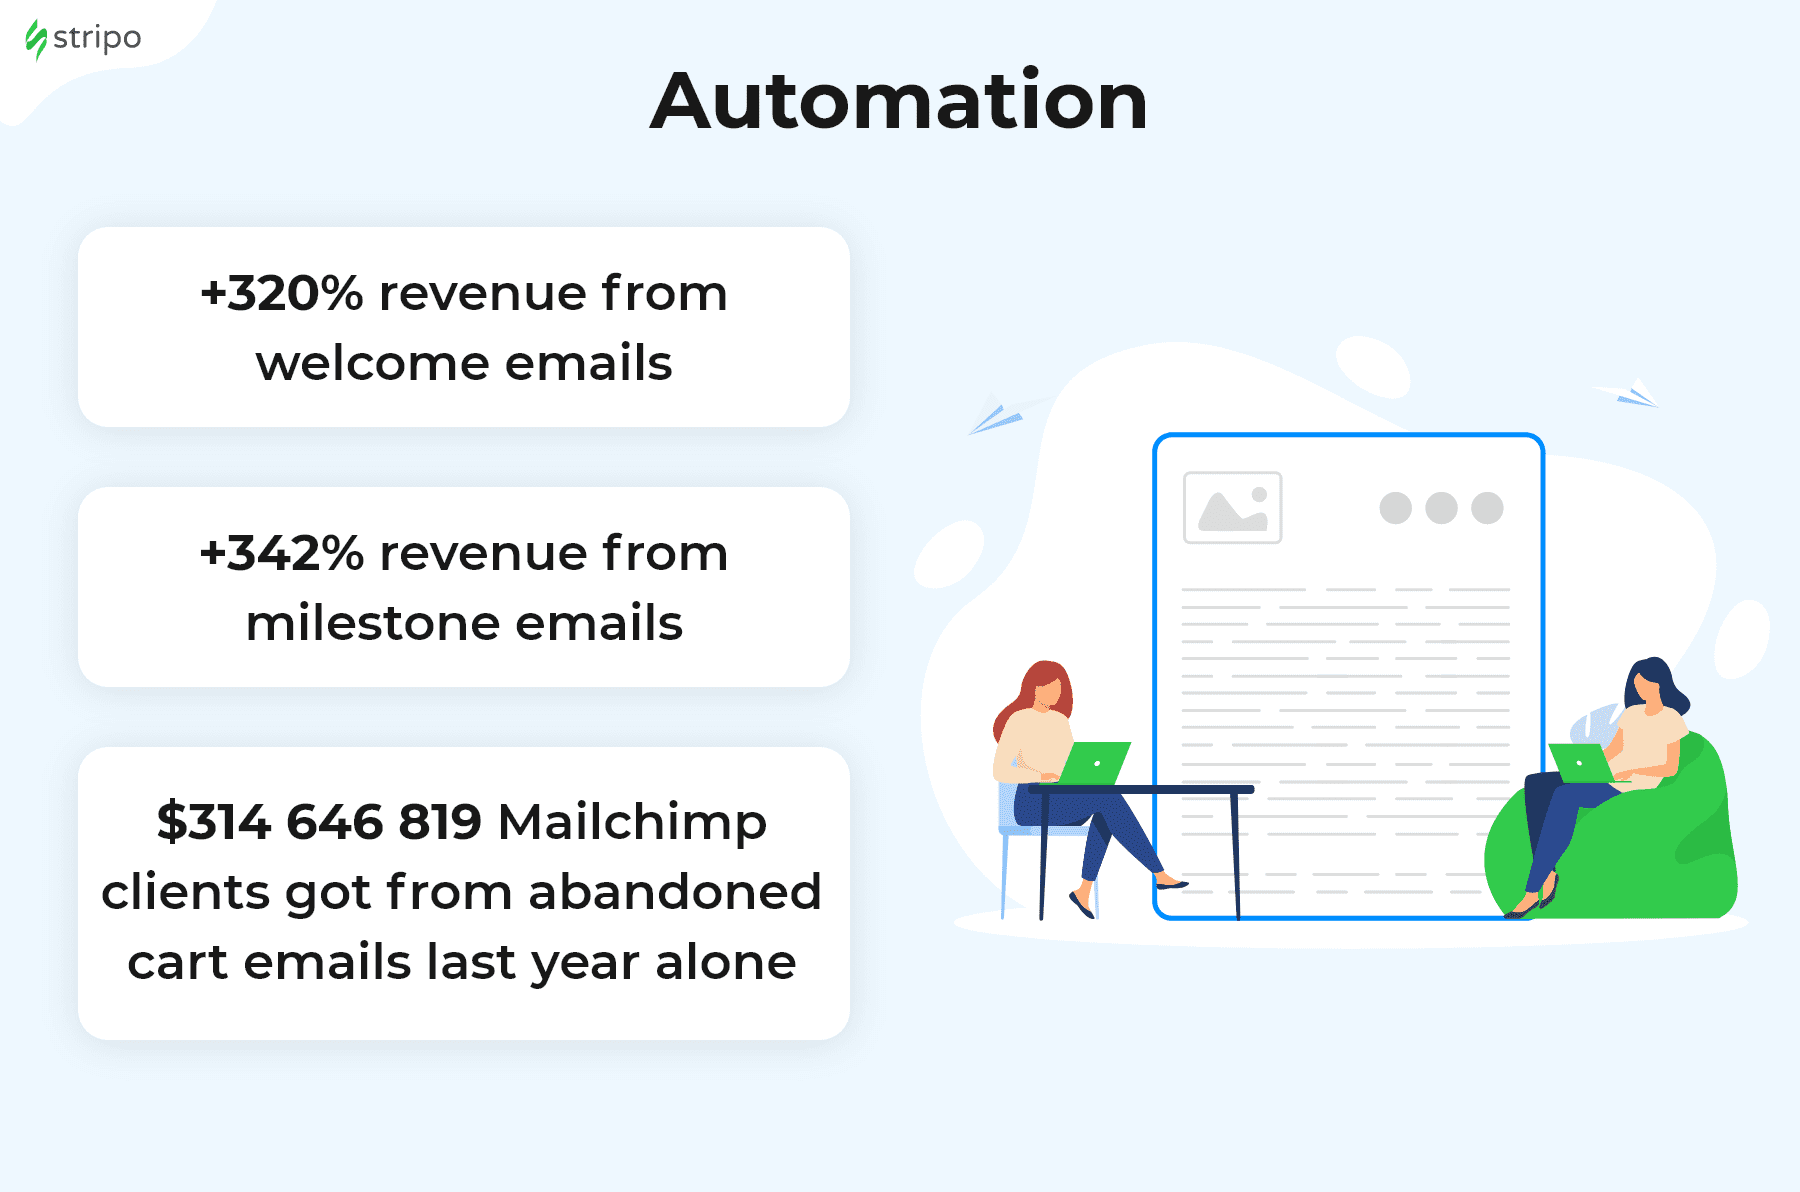 Benefits of Email Marketing Automation